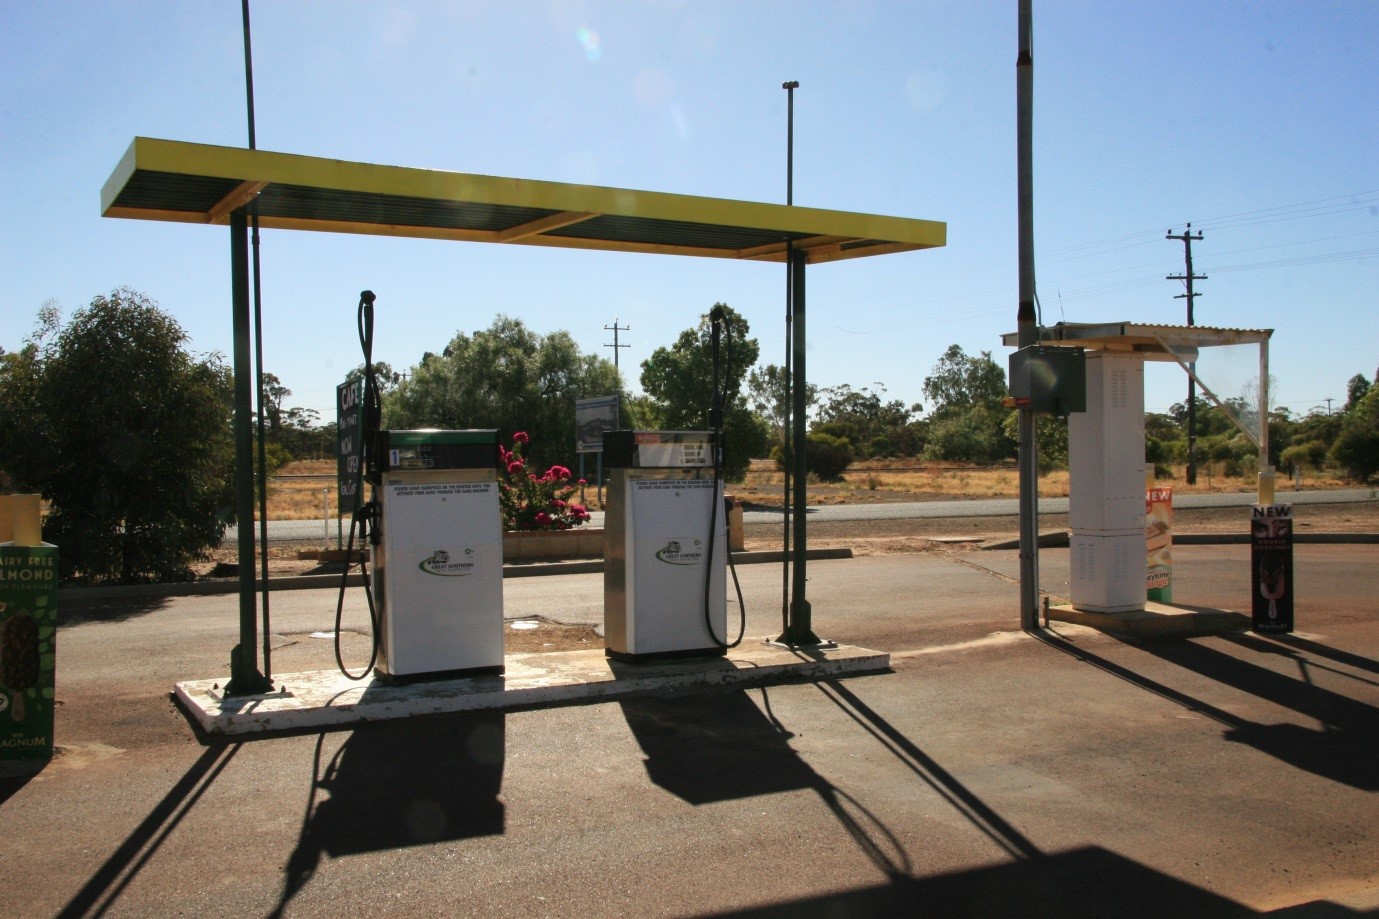 24 Hr Card Fuel Service Opposite Wegners Rural Store on the Main Street of Nungarin